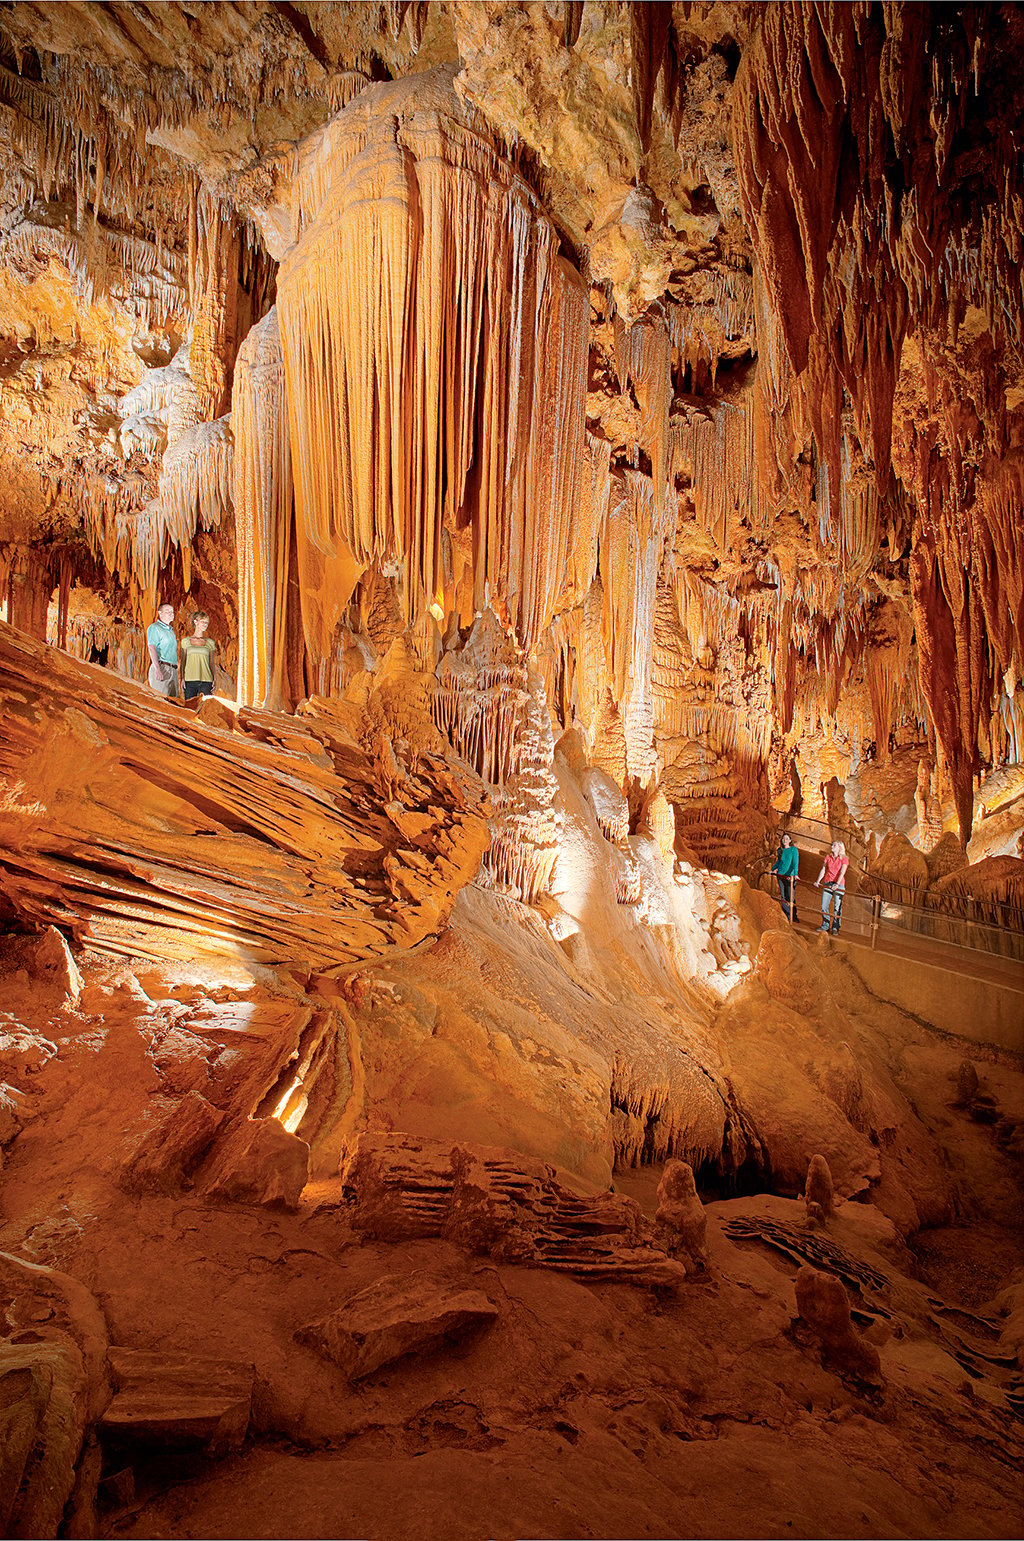 Luray Caverns. Photograph courtesy of Moore Public Relations.